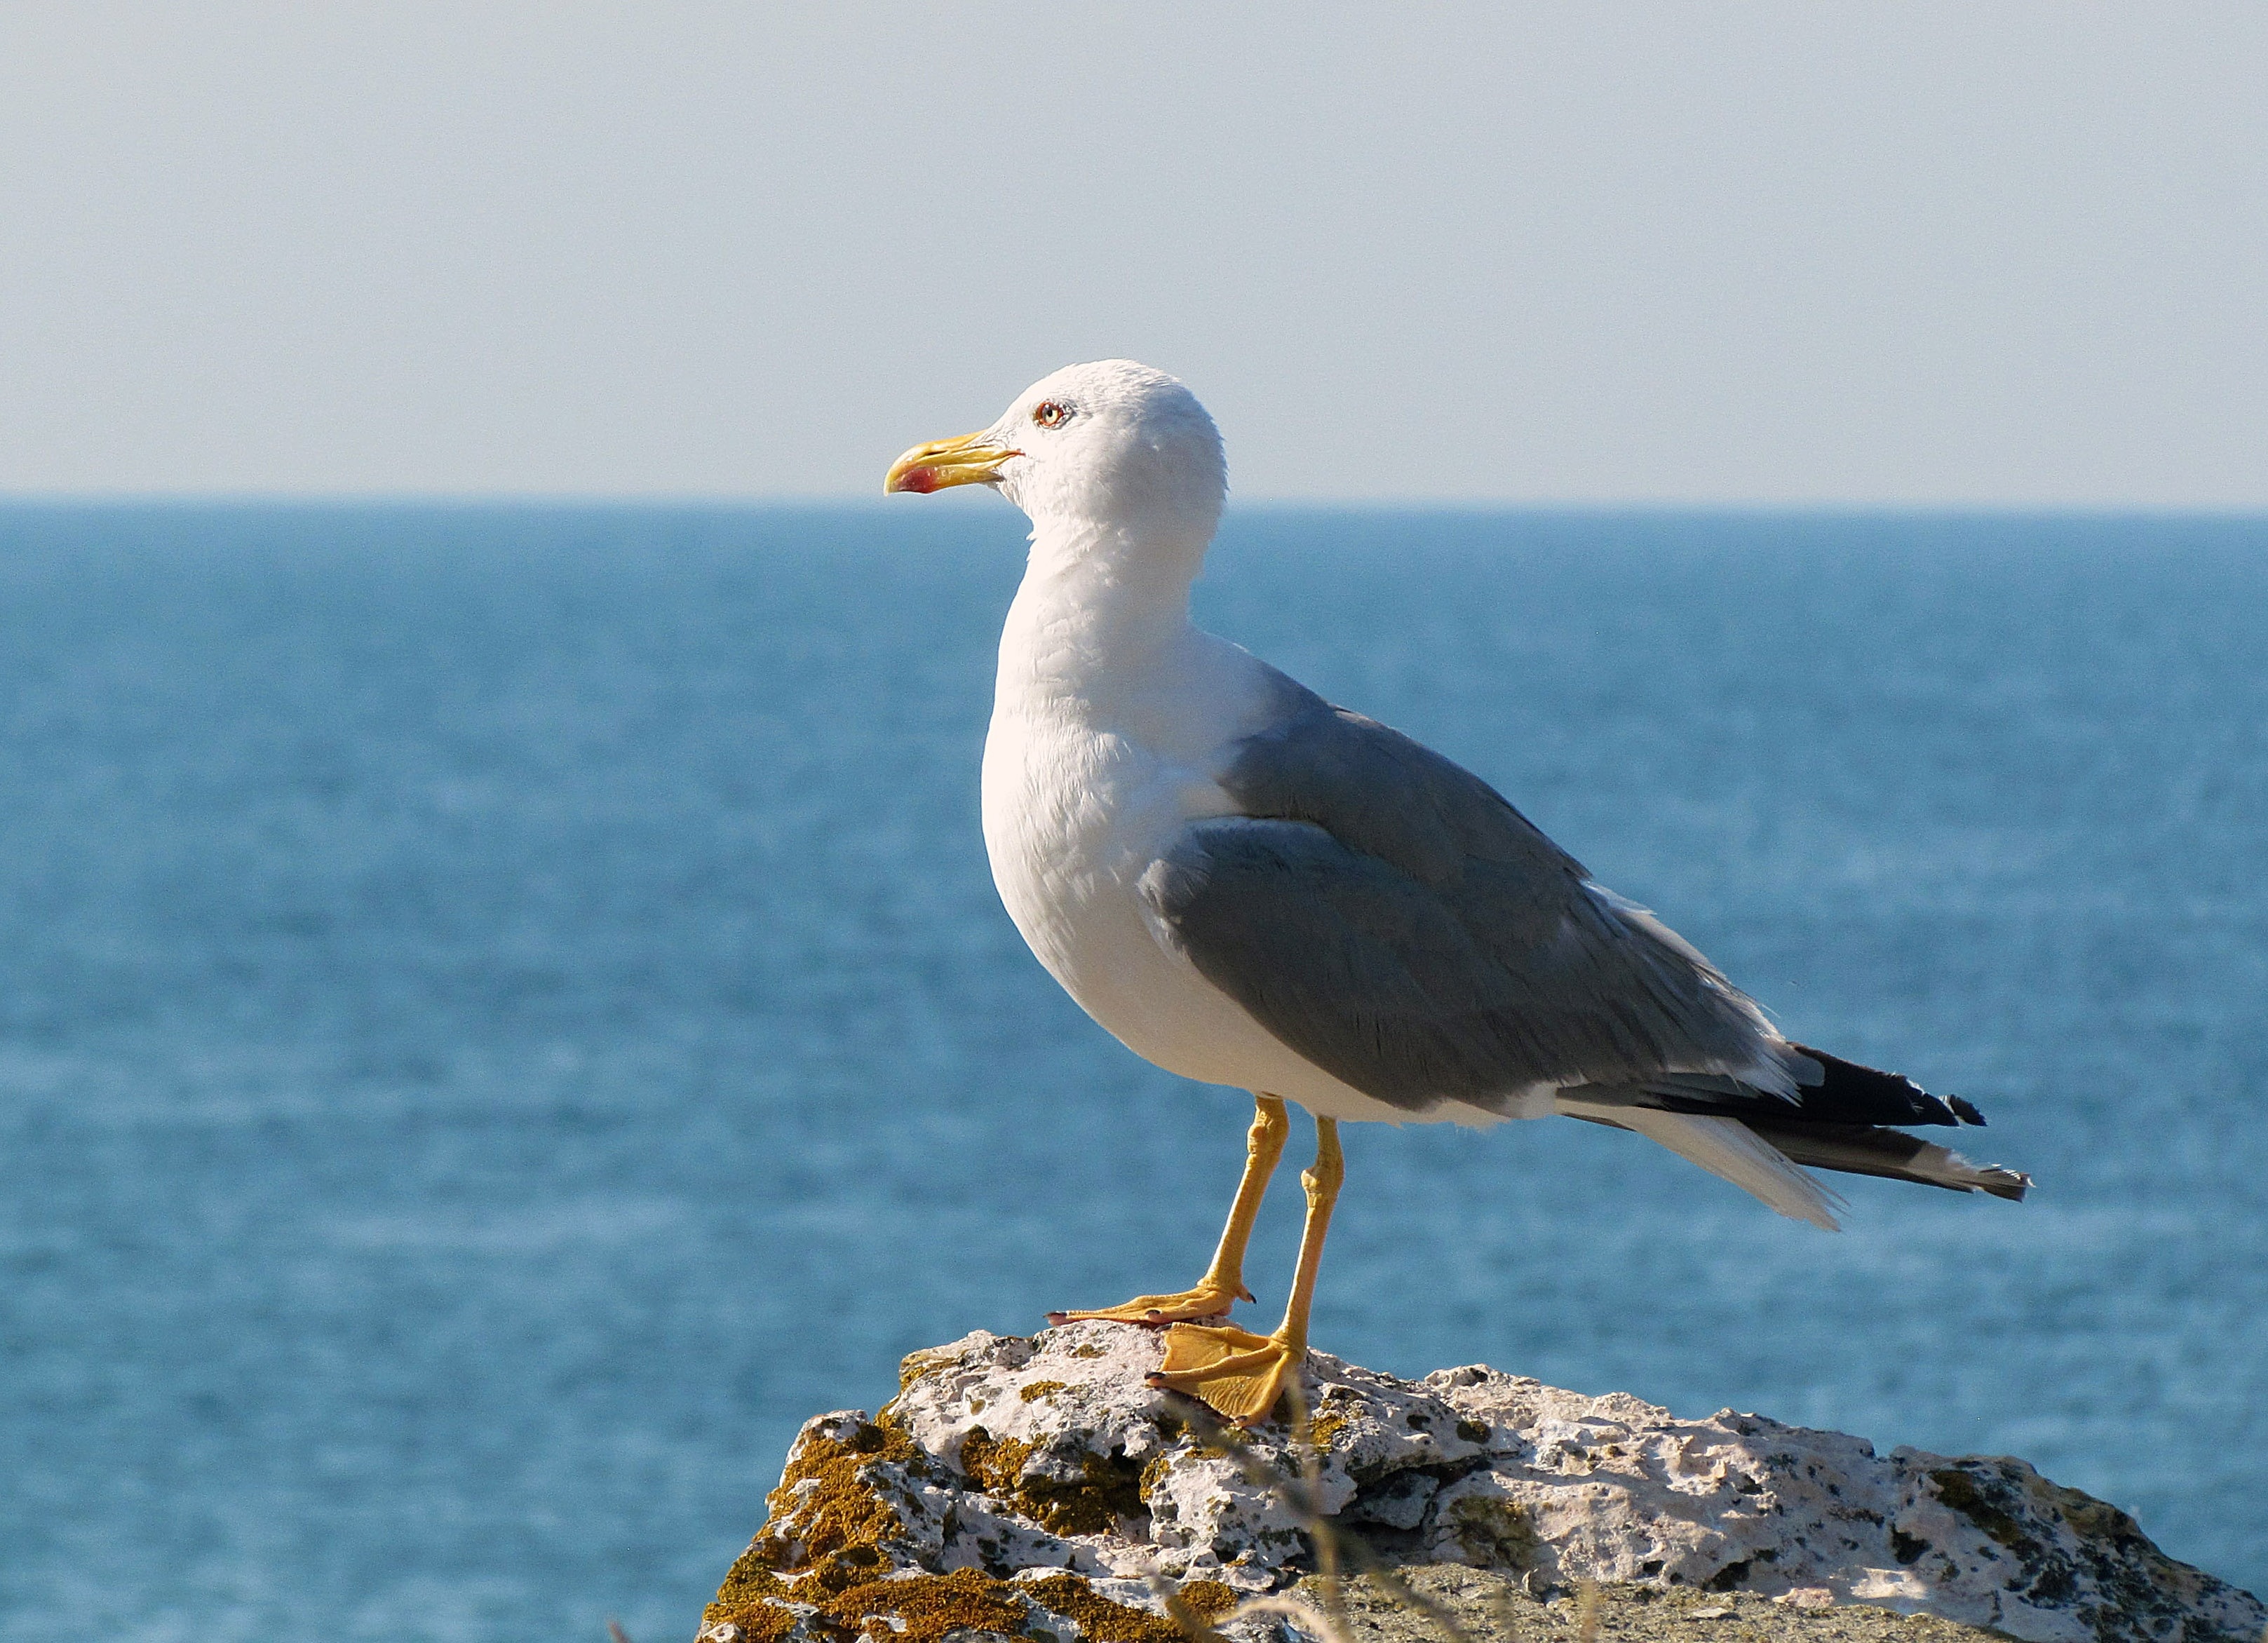 white and grey seagul